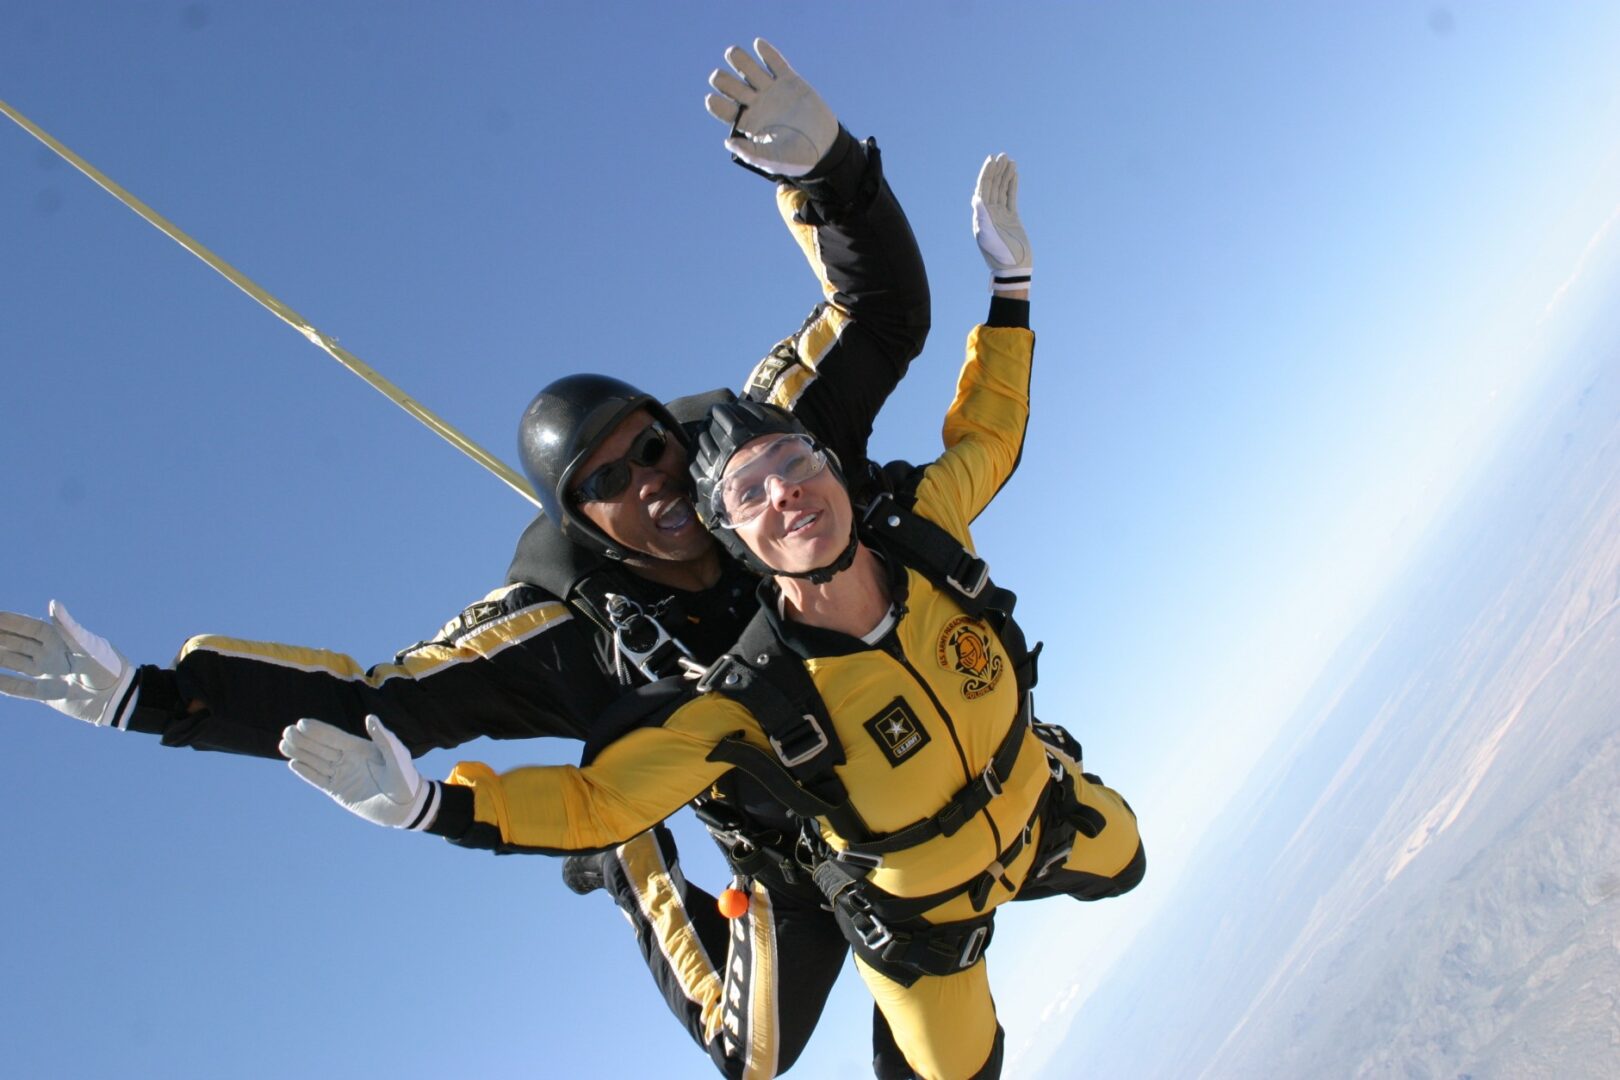 Two people are skydiving in the air.